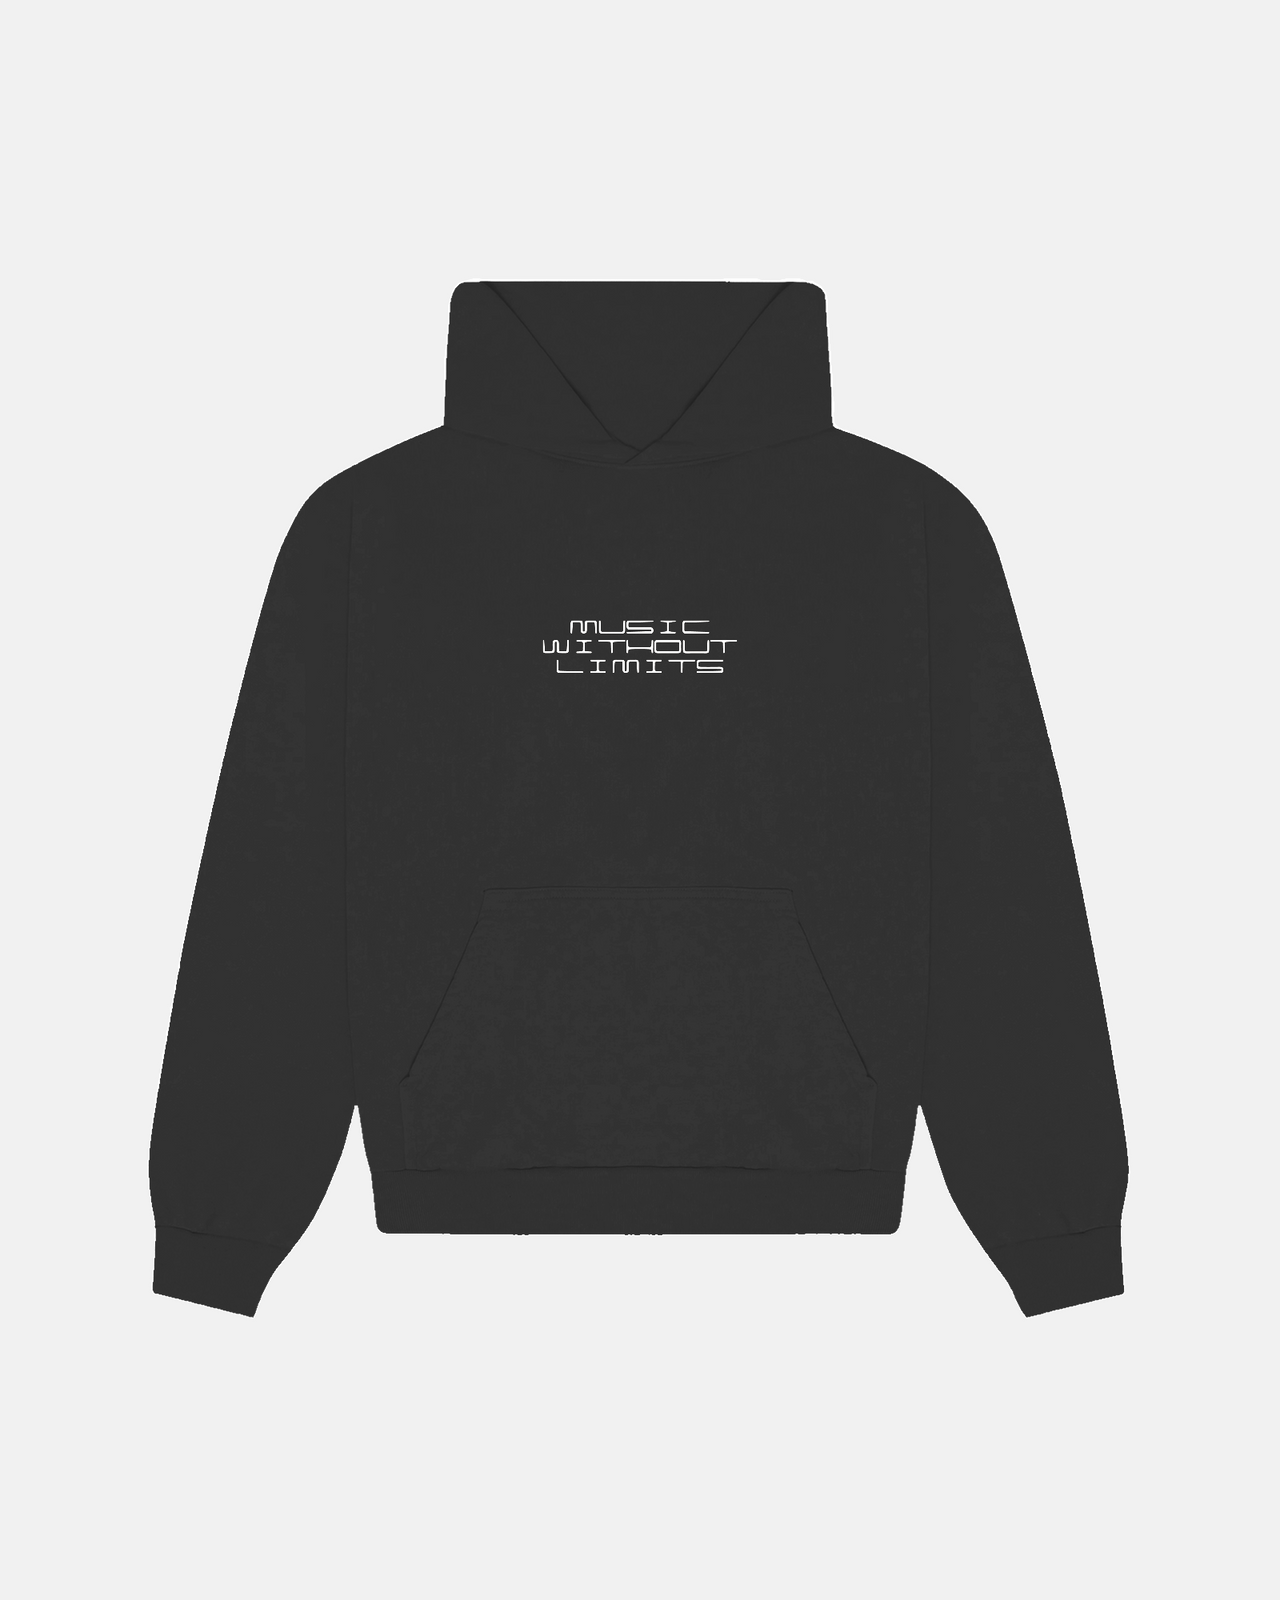 Music Without Limits Logo Hoodie